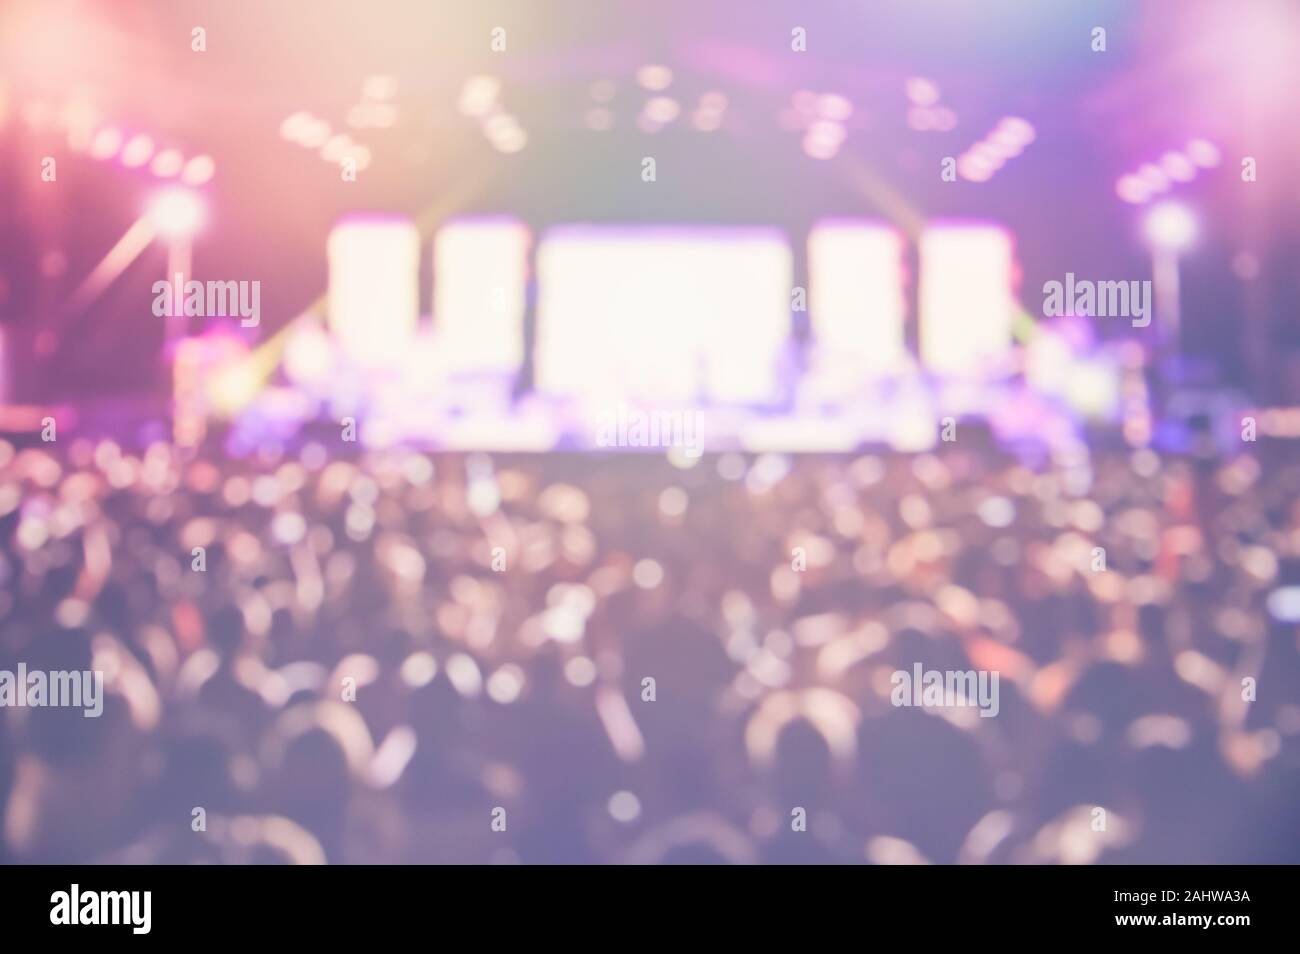 Blurred concert night background defocused lights party background Stock Photo